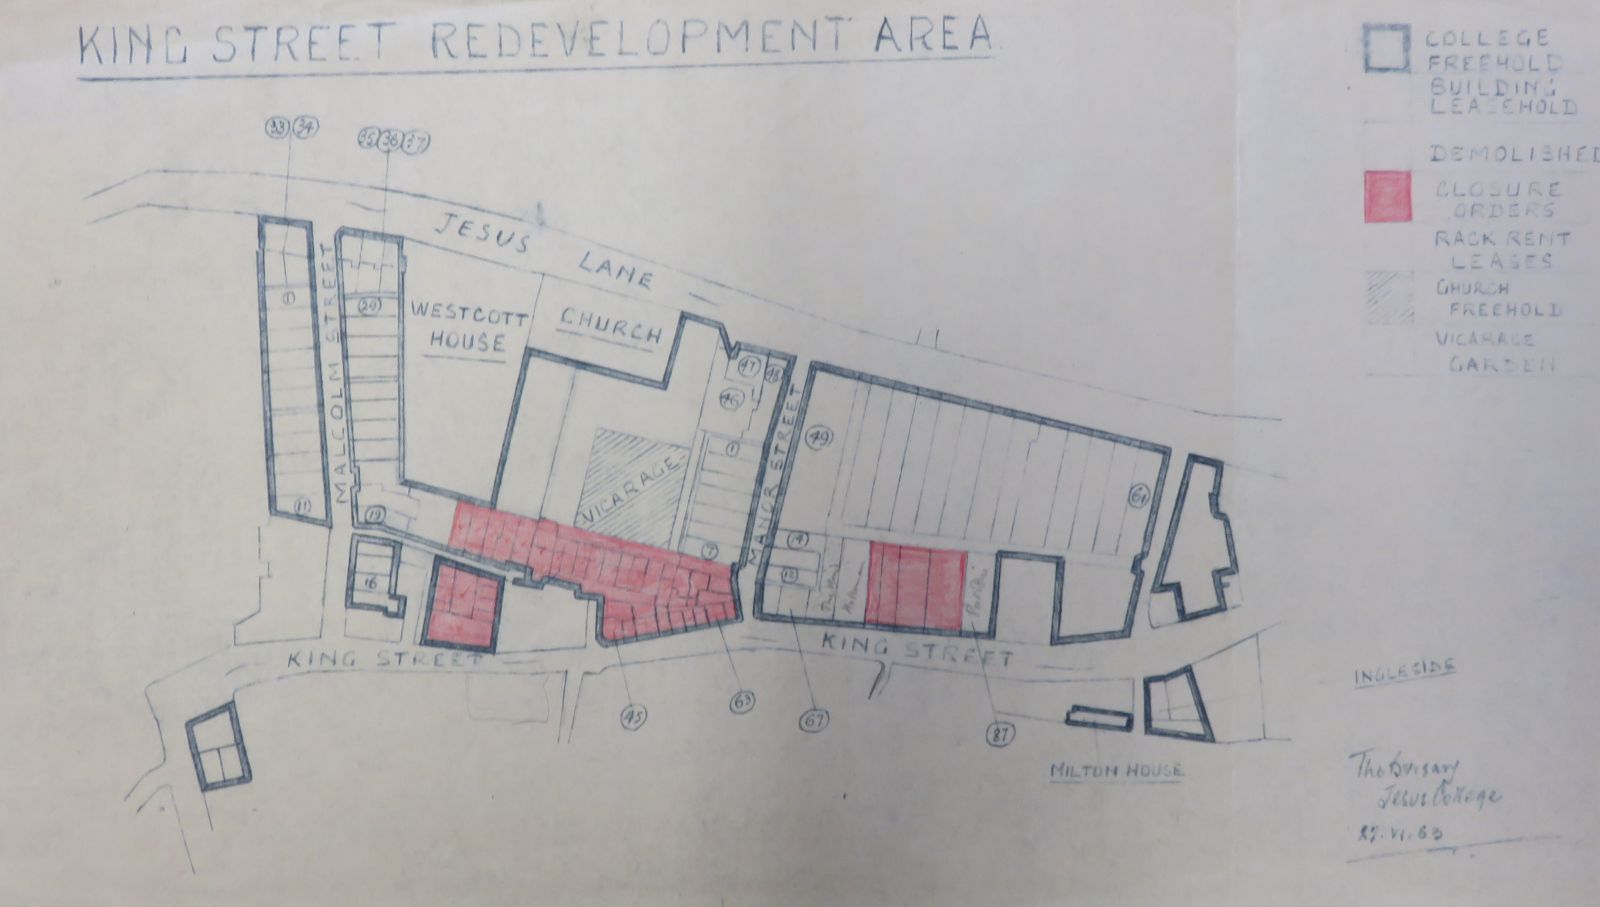 King Street redevelopment area: Early proposals. Showing area for redevelopment and ownership and status of properties. (Archive ref: JCAD-3-CAM-MALC-DEV-1-1963-3)